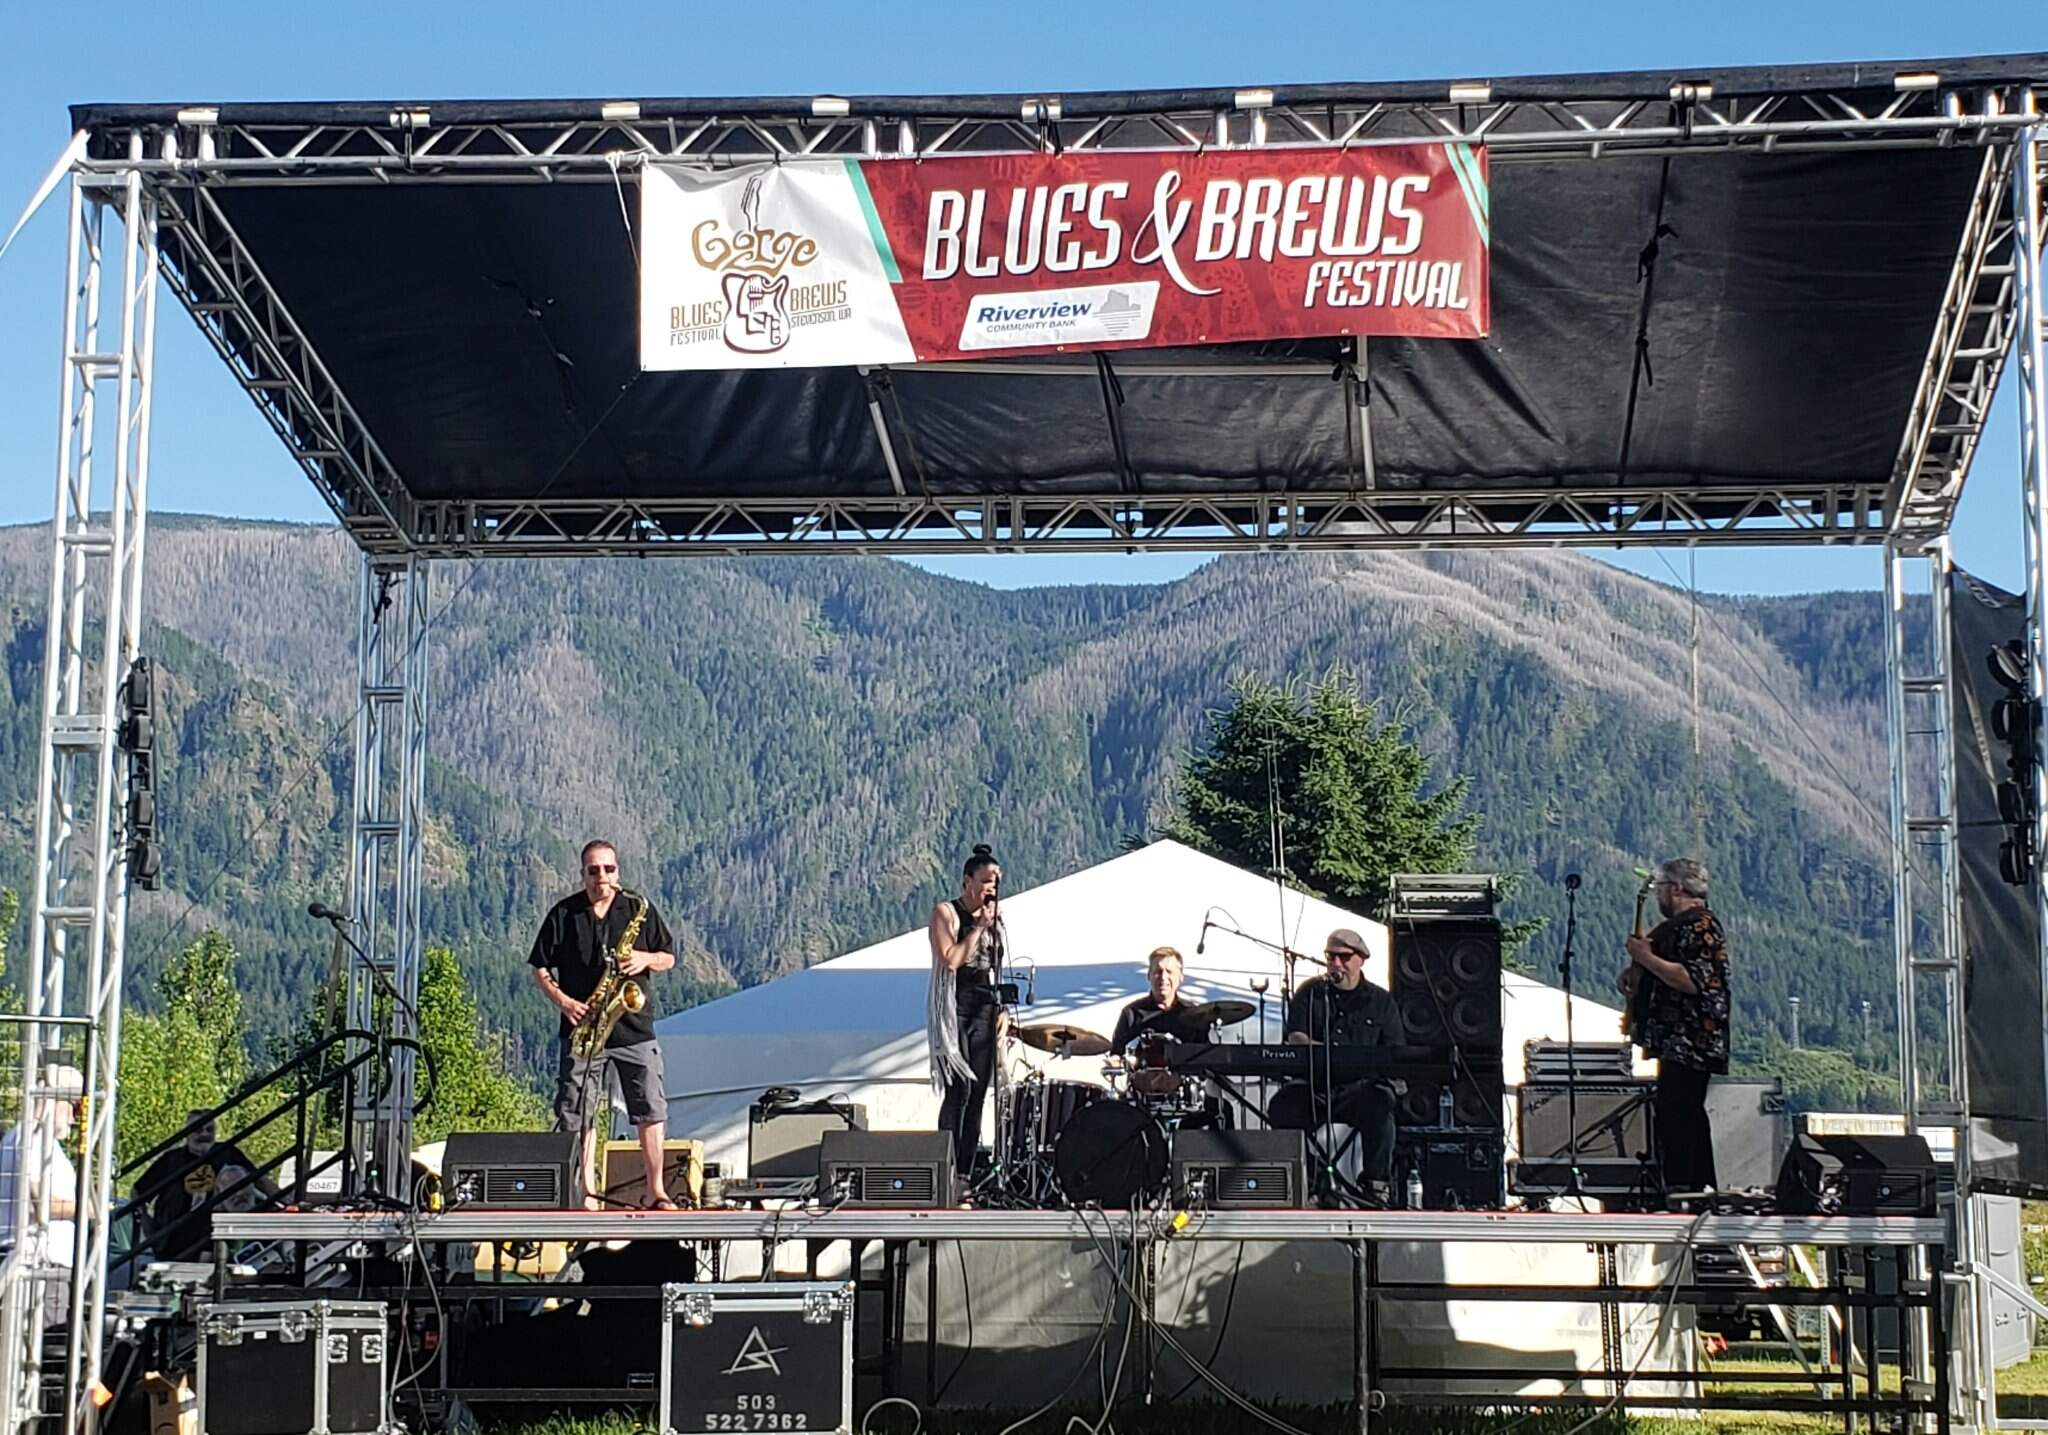 9-facts-about-gorge-blues-and-brews-festival